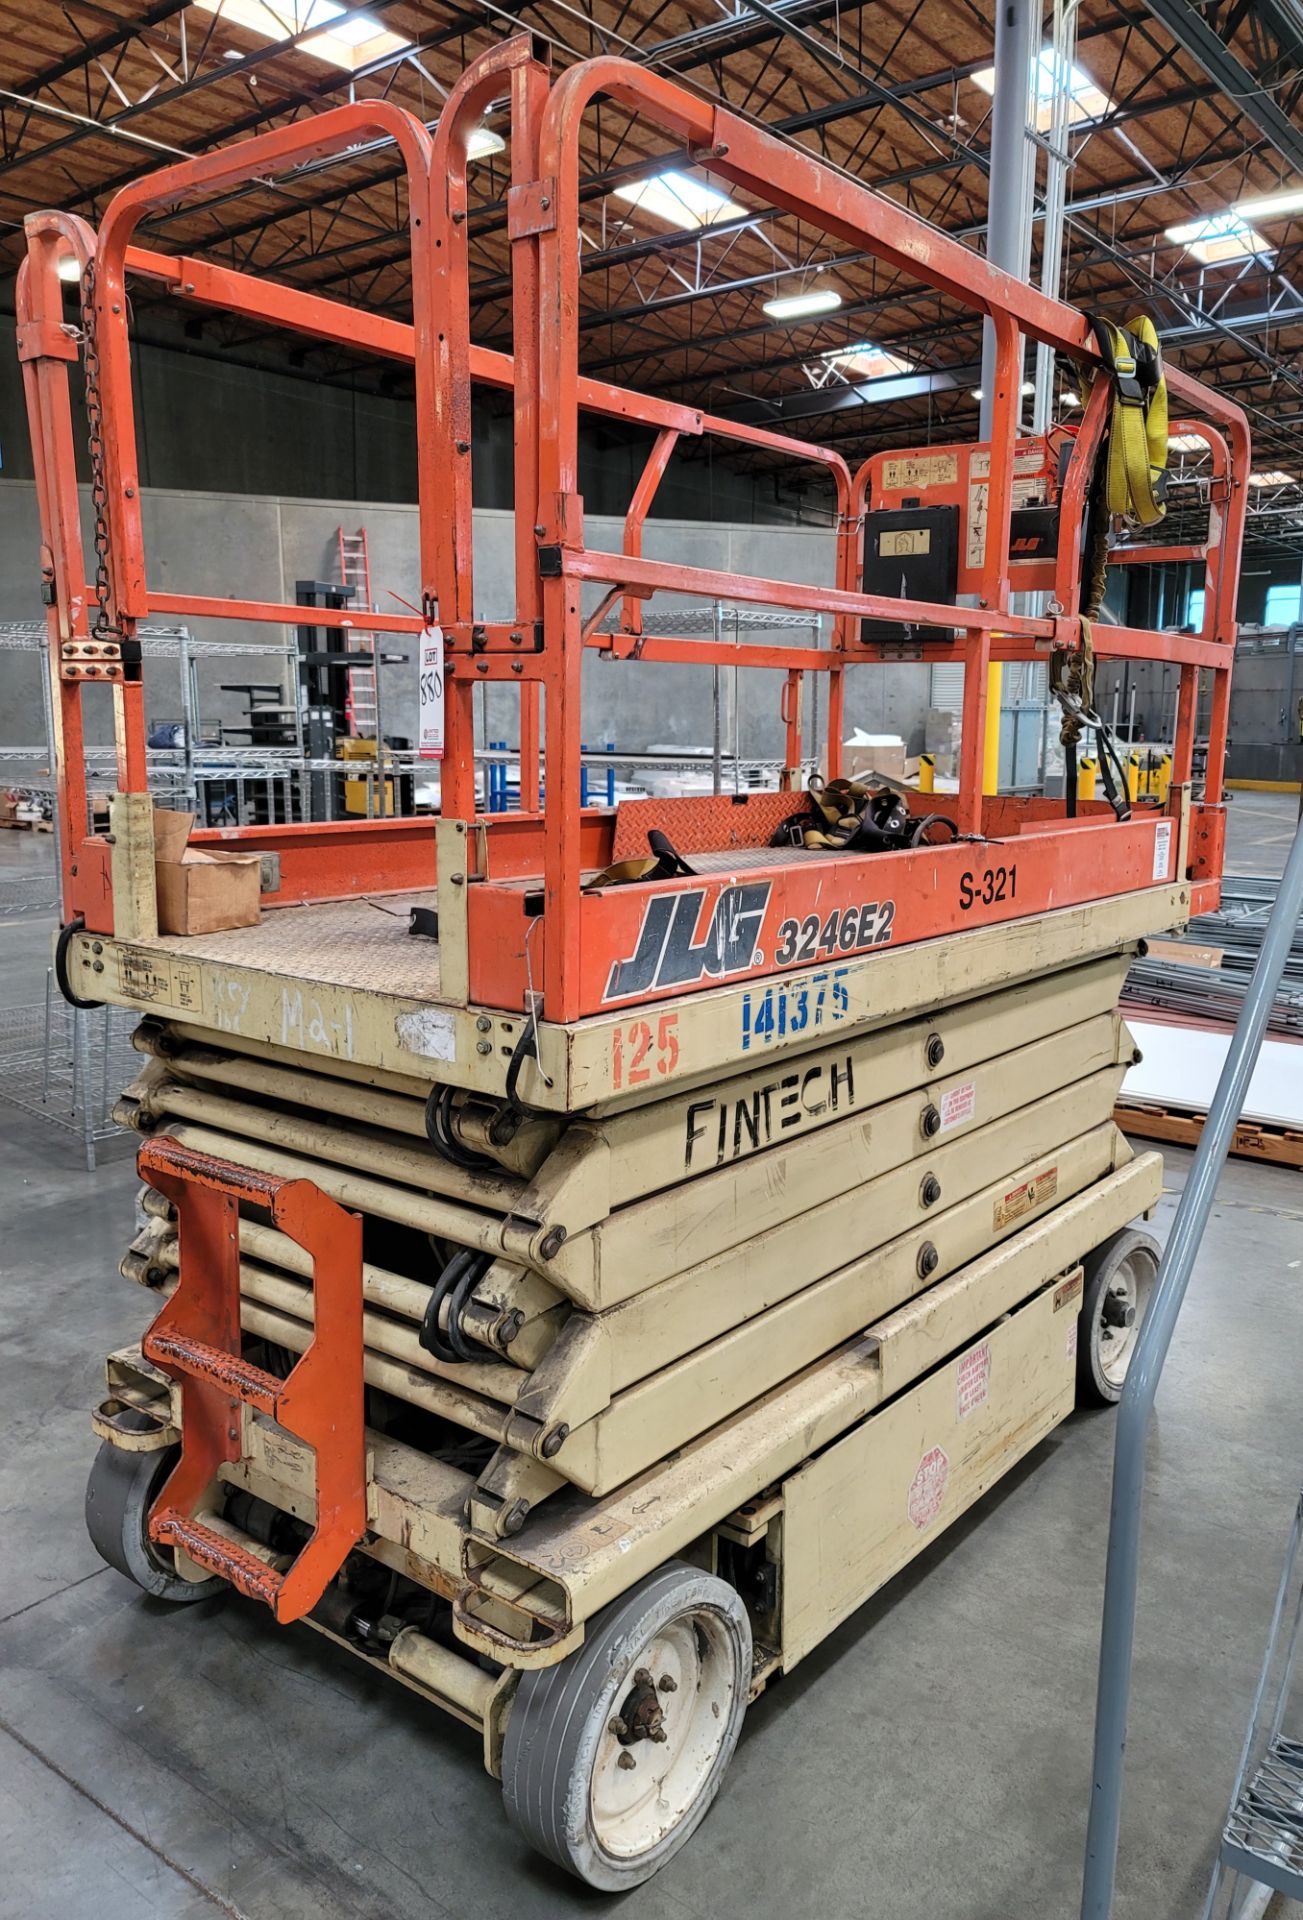 JLG 3246E2 ELECTRIC SCISSOR LIFT, 32' ELEVATED HEIGHT, APPROX. 8,700 HOURS (DELAYED PICKUP UNTIL